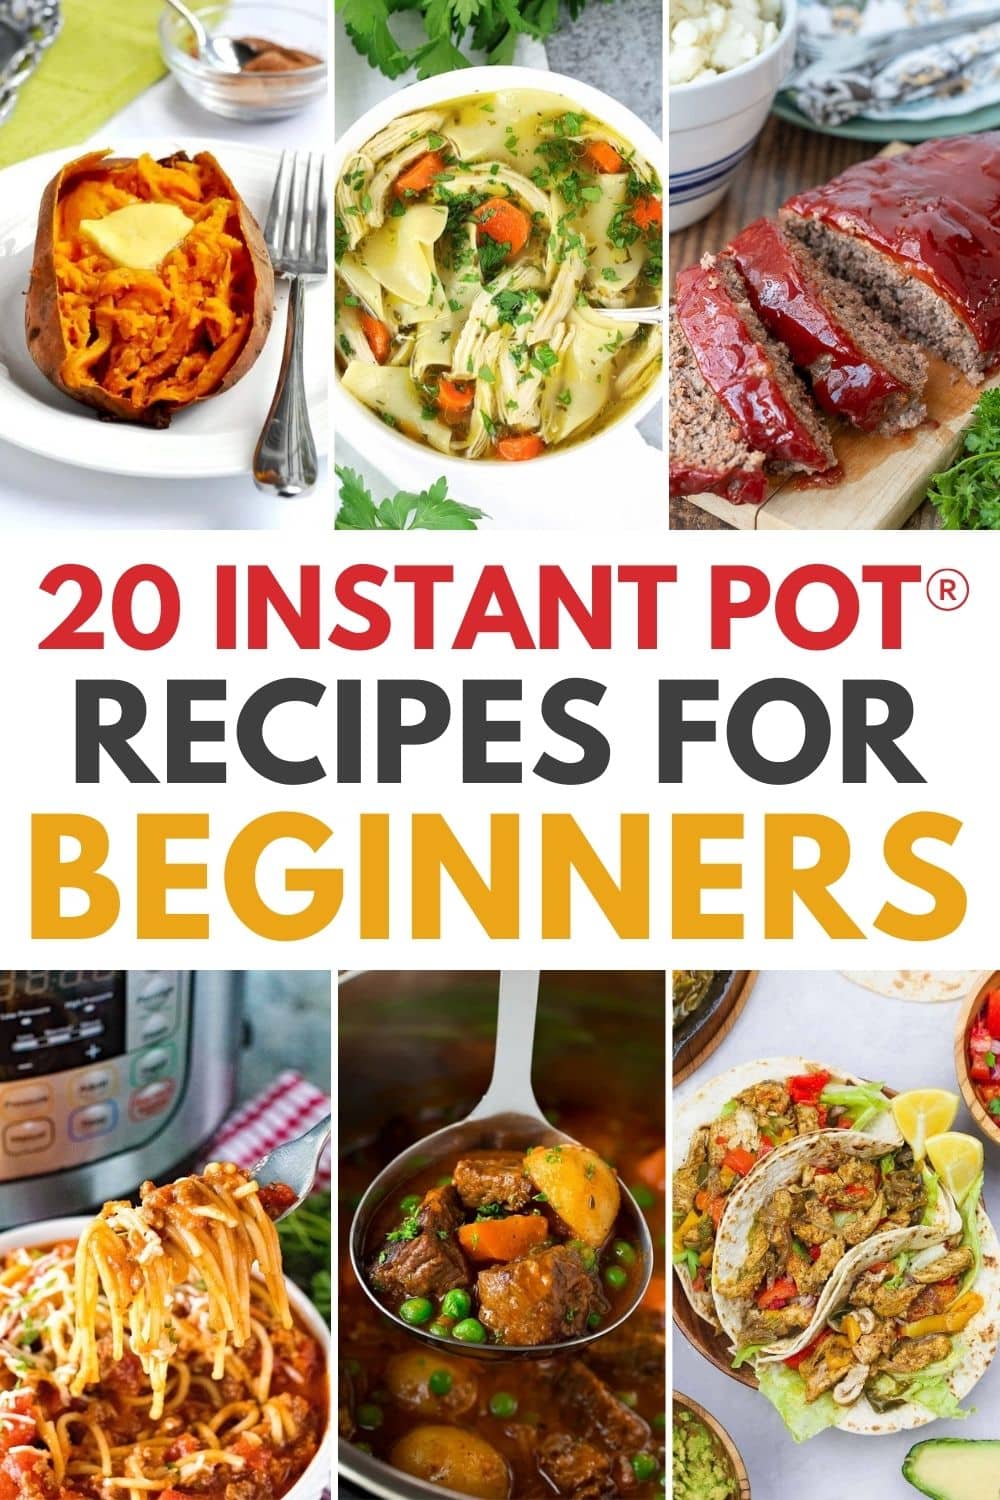 Discover 20 easy-to-follow instant pot recipes perfect for beginners.